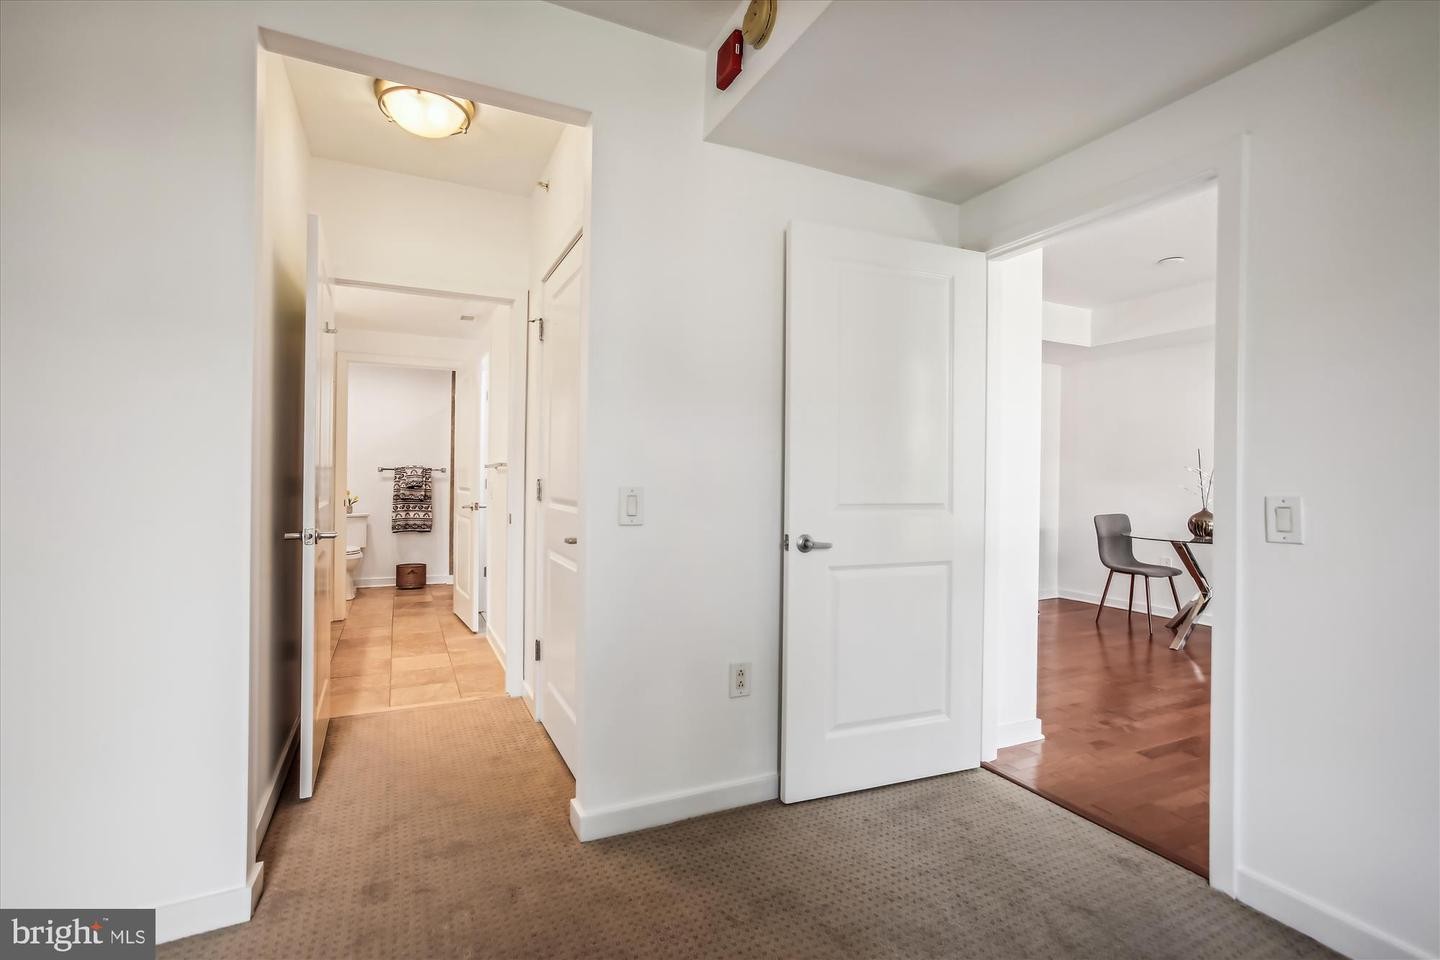 17. 475 K St NW 